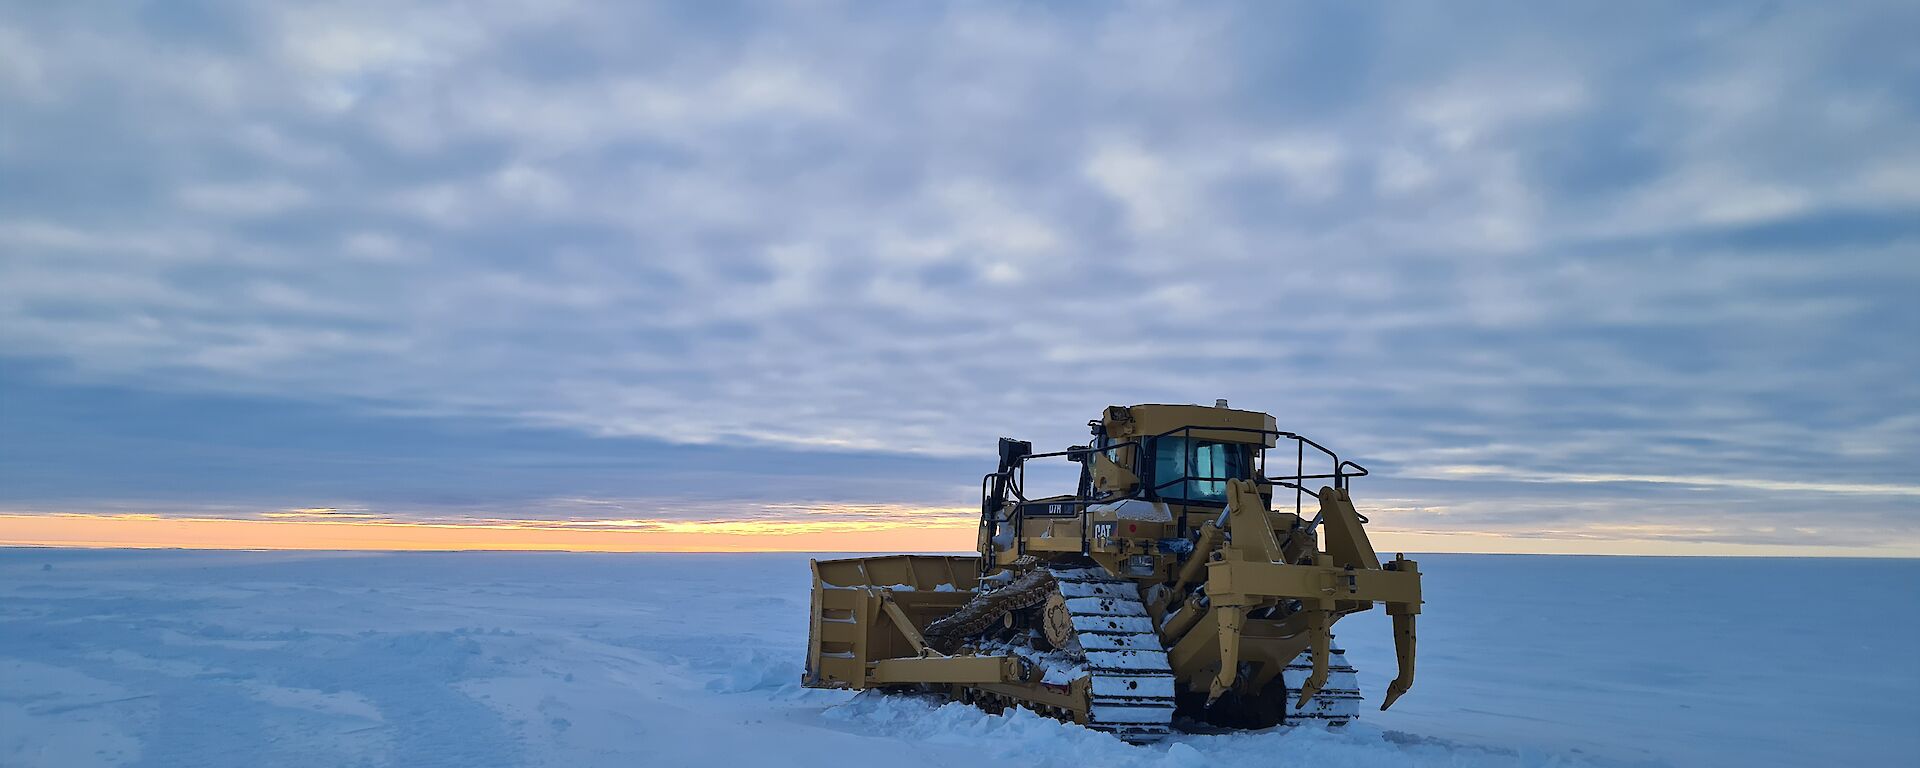 A large yellow bulldozer parked on a flat expanse of snow covered ice. There is an even layer of low cloud stretching out to the horizon.